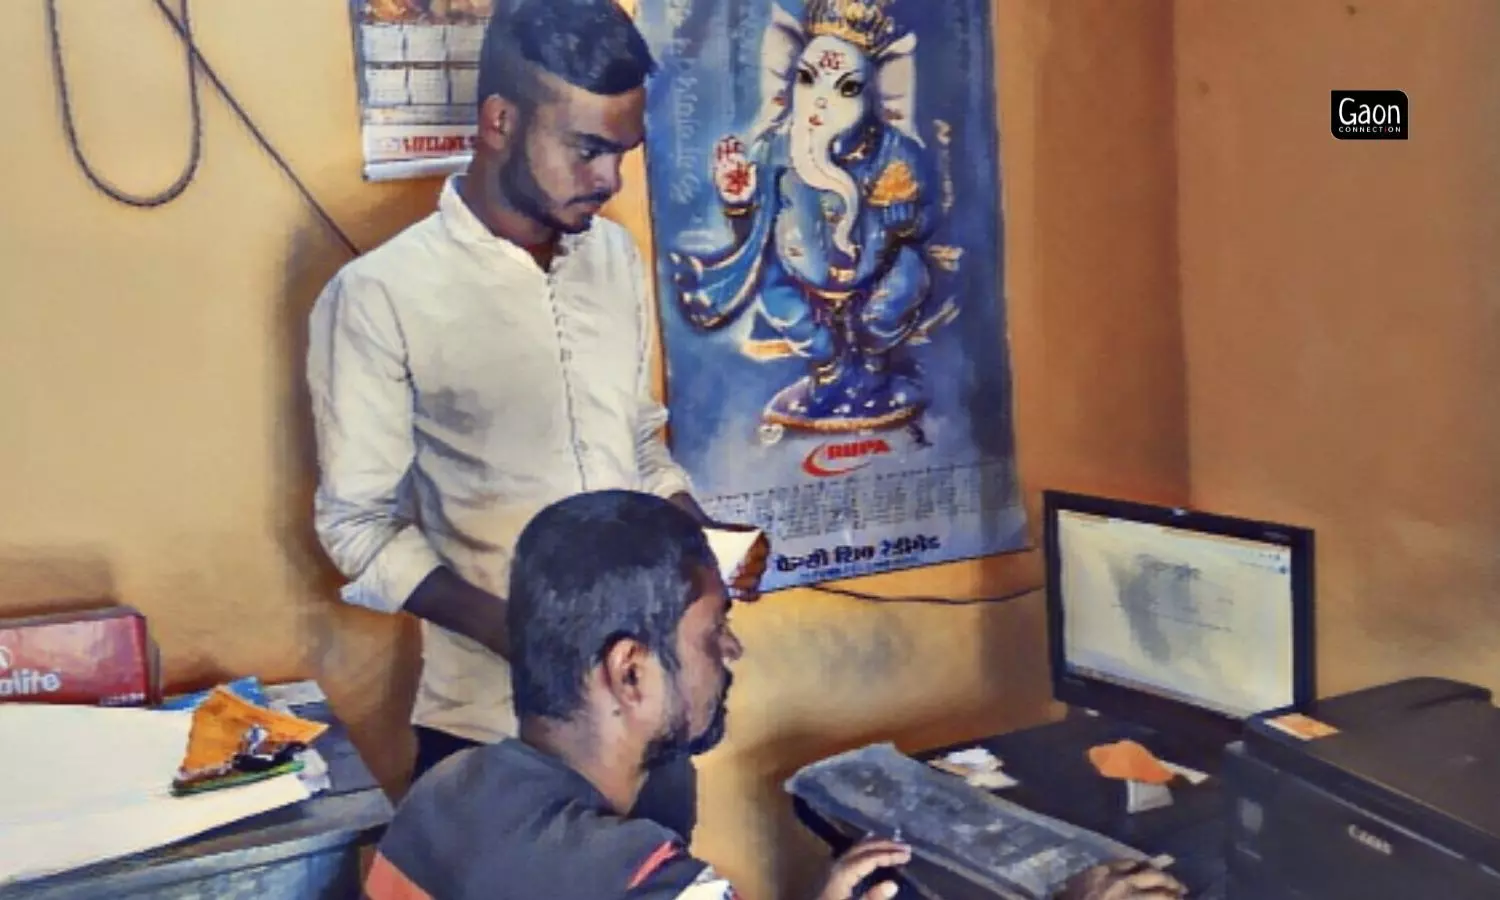 Homewards and onwards — village youth return home to set up cybercafes and catering businesses